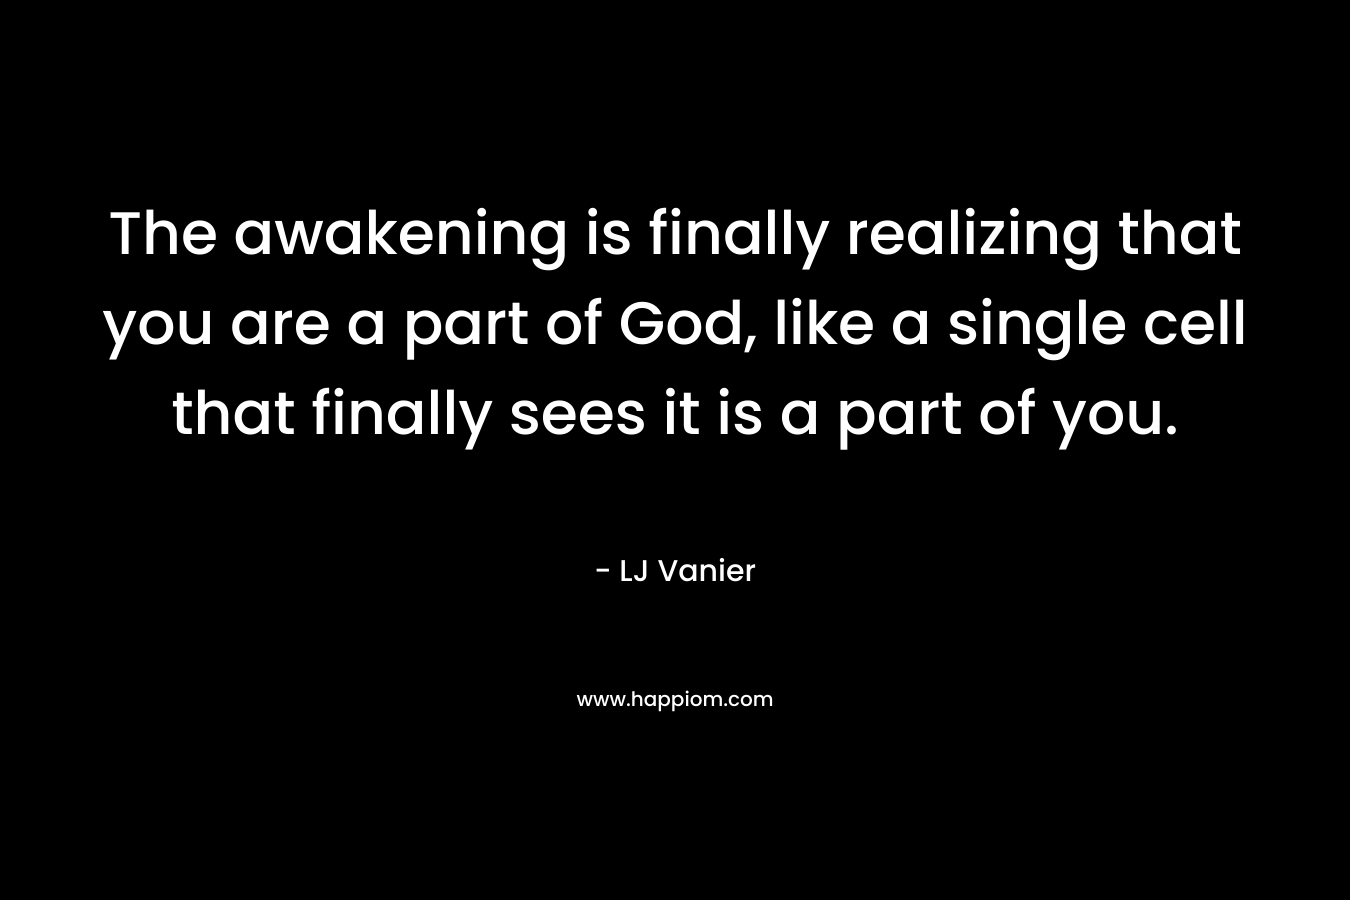 The awakening is finally realizing that you are a part of God, like a single cell that finally sees it is a part of you. – LJ Vanier